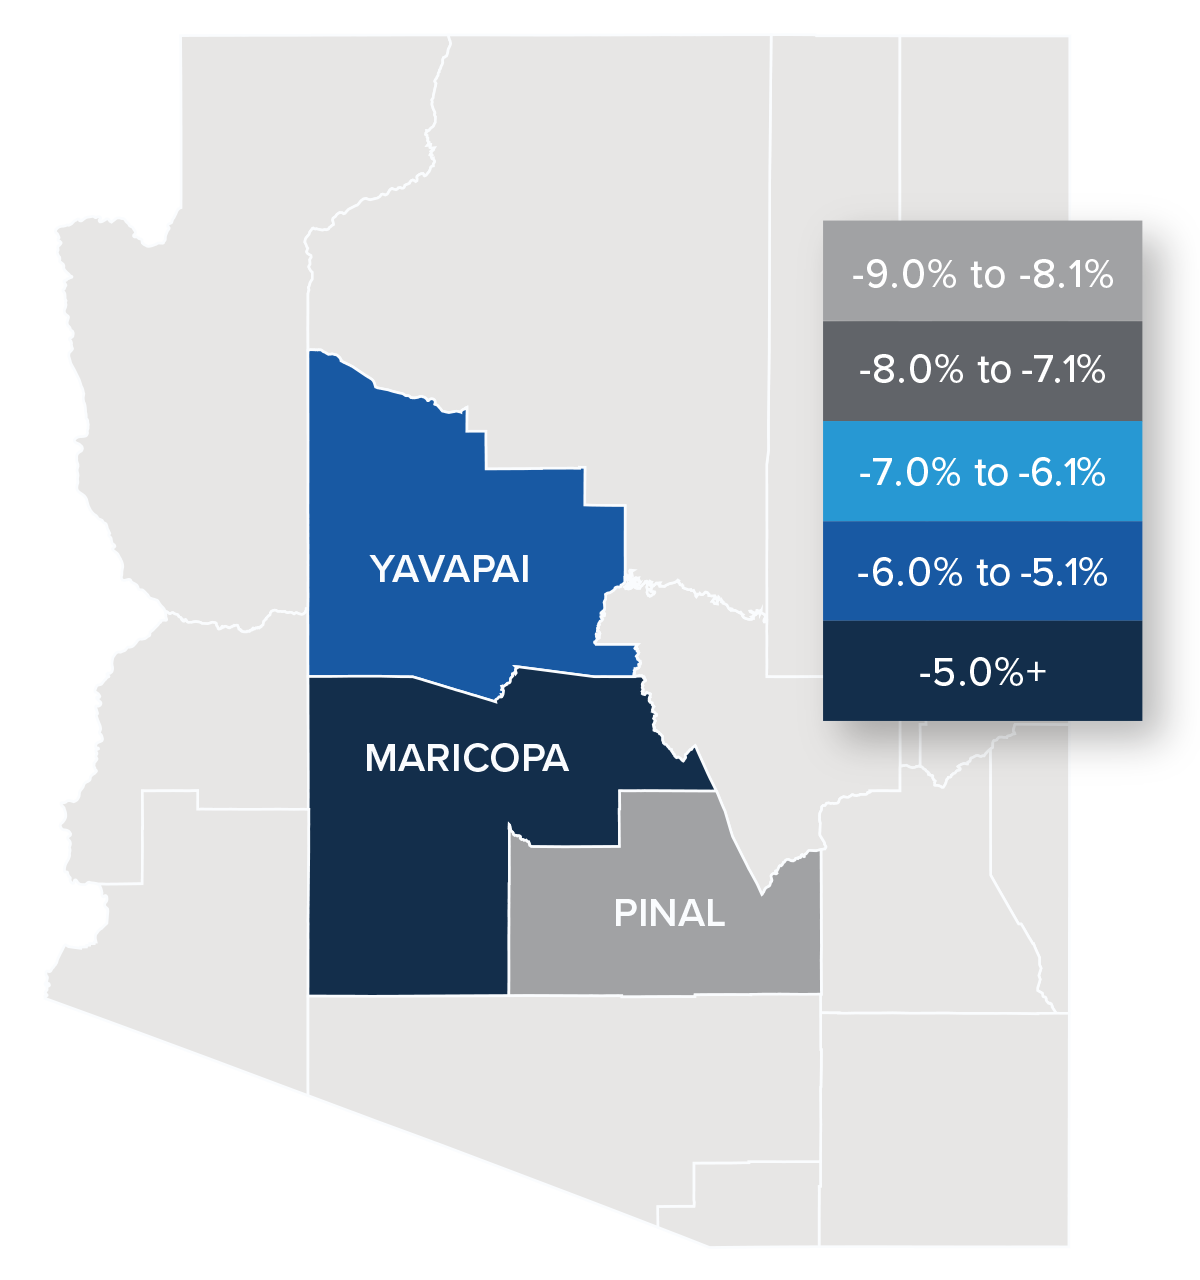 A map showing the real estate home prices percentage changes for various counties in Arizona. Different colors correspond to different tiers of percentage change. Pinal had a percentage change in the -9% to -8.1% range. Yavapai was in the -6% to -5.1% change range. Maricopa County was in the 5%+ range.